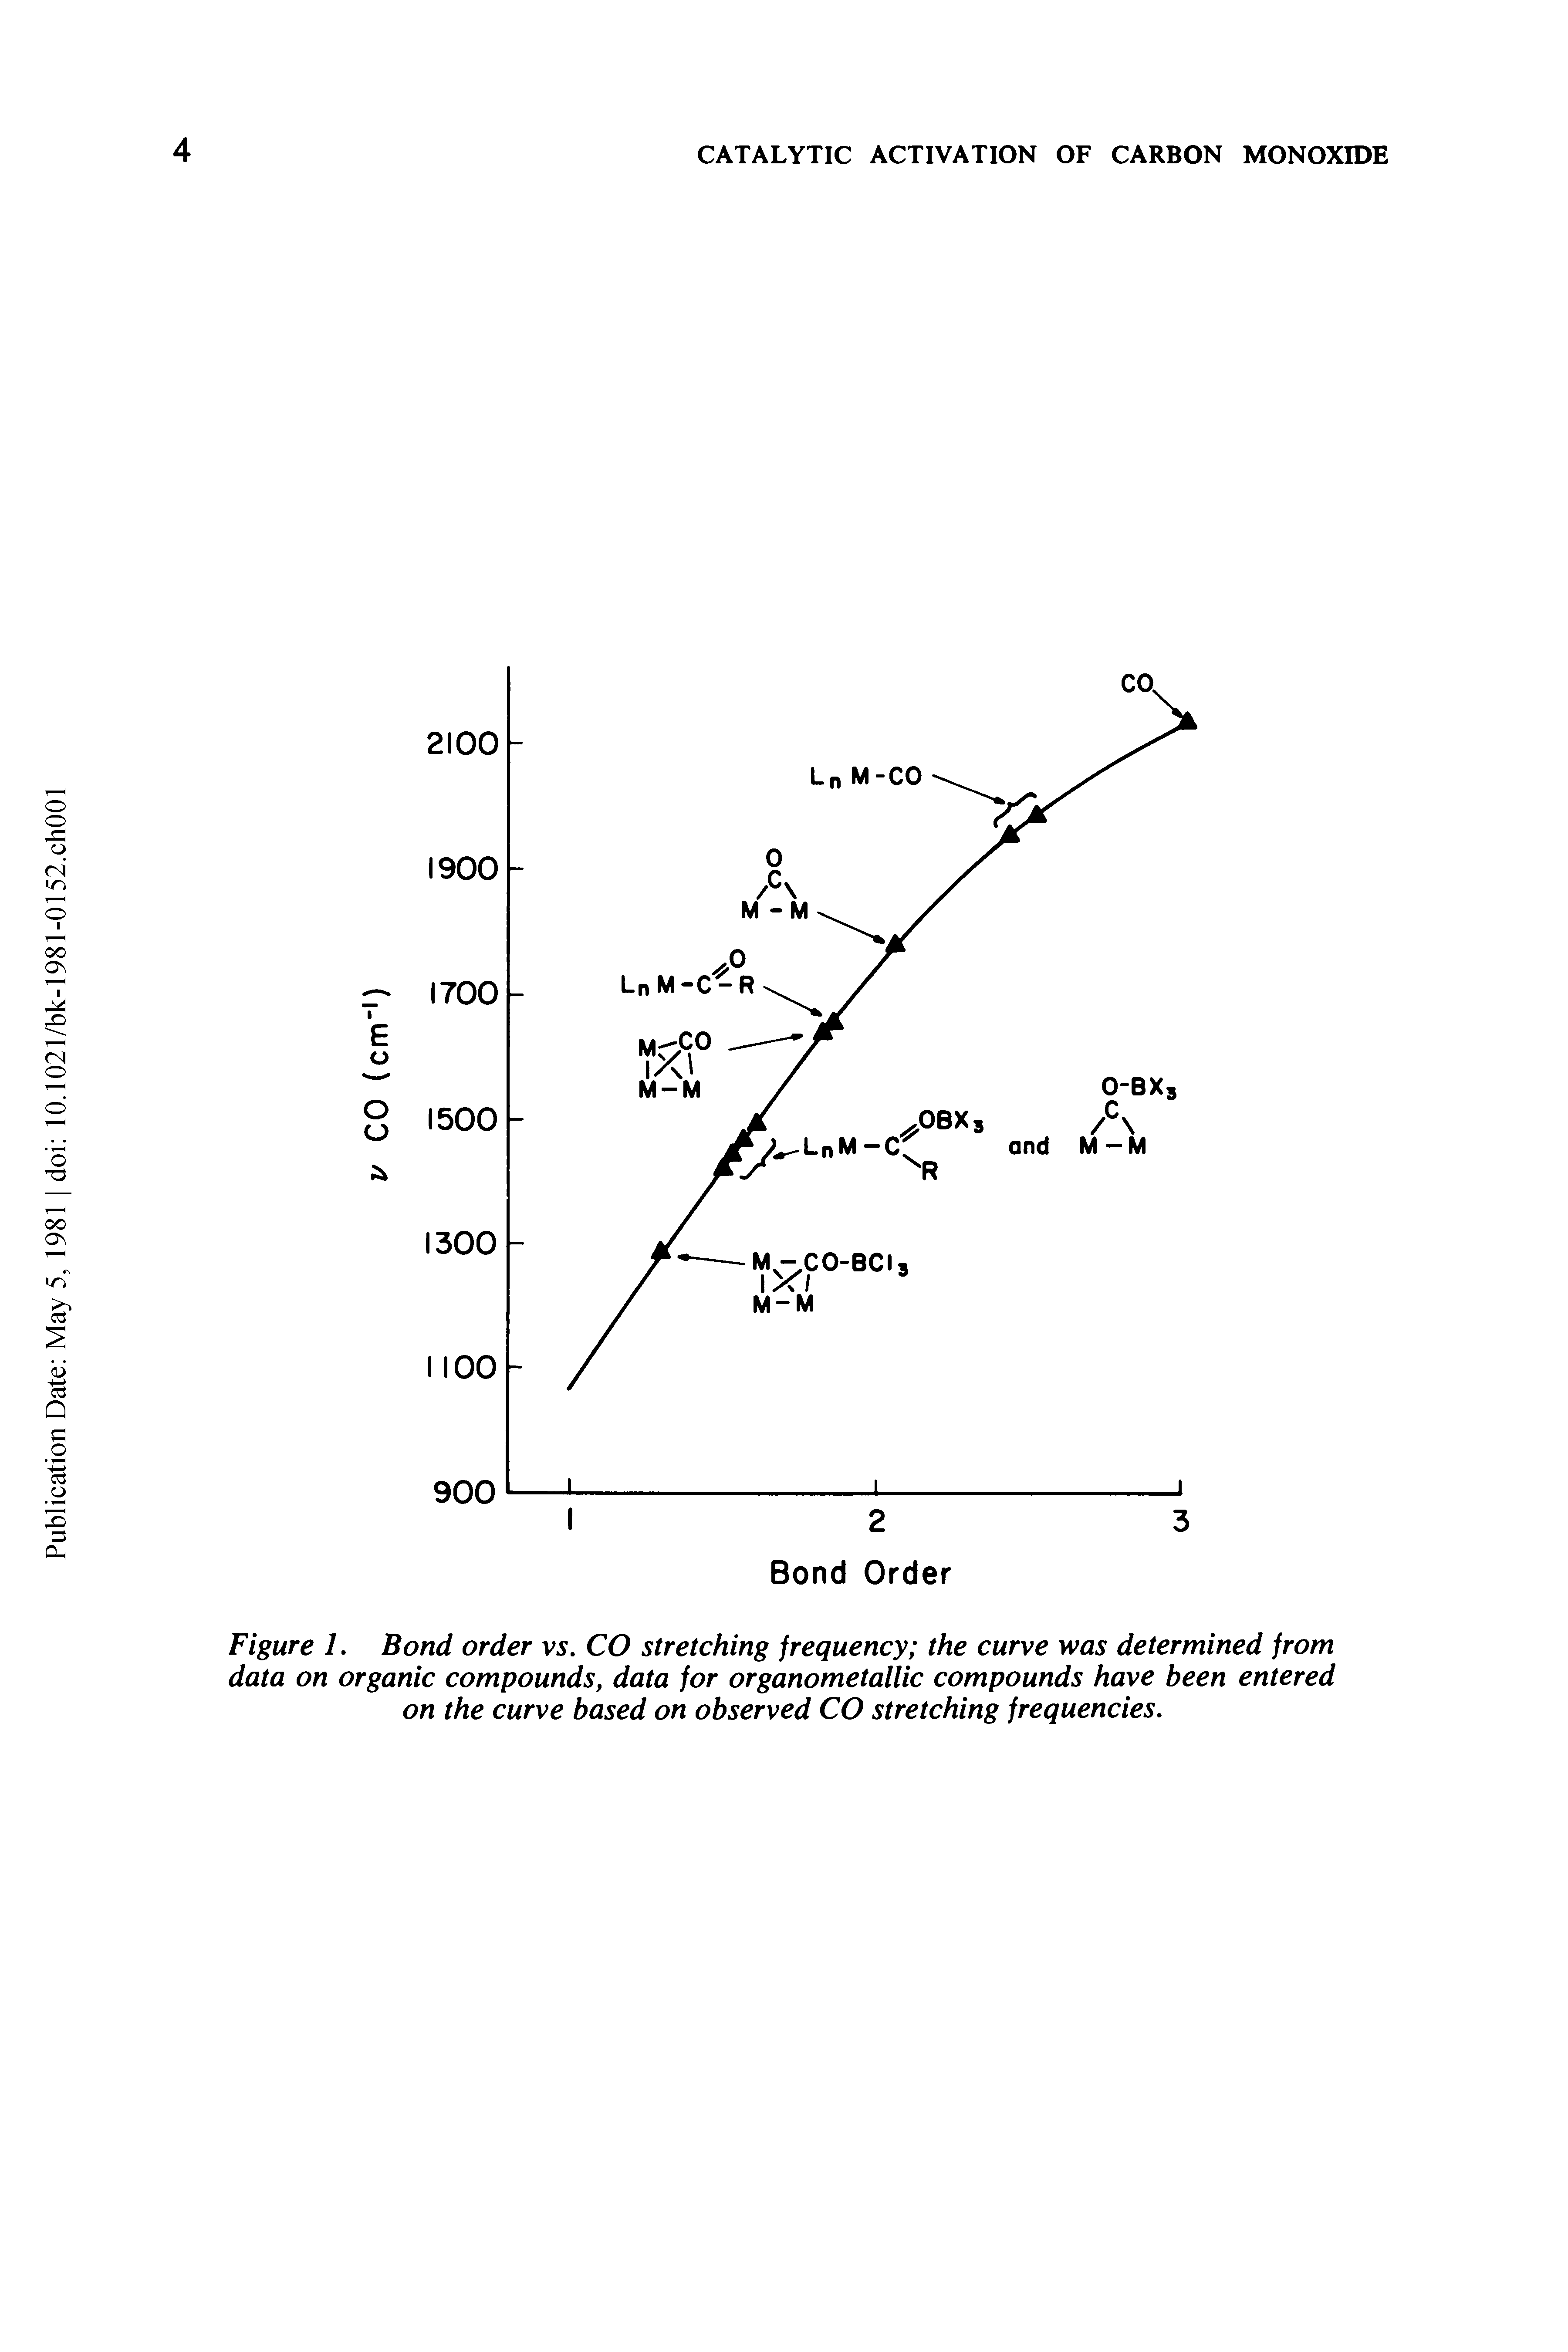 Figure 1. Bond order vs. CO stretching frequency the curve was determined from data on organic compounds, data for organometallic compounds have been entered on the curve based on observed CO stretching frequencies.